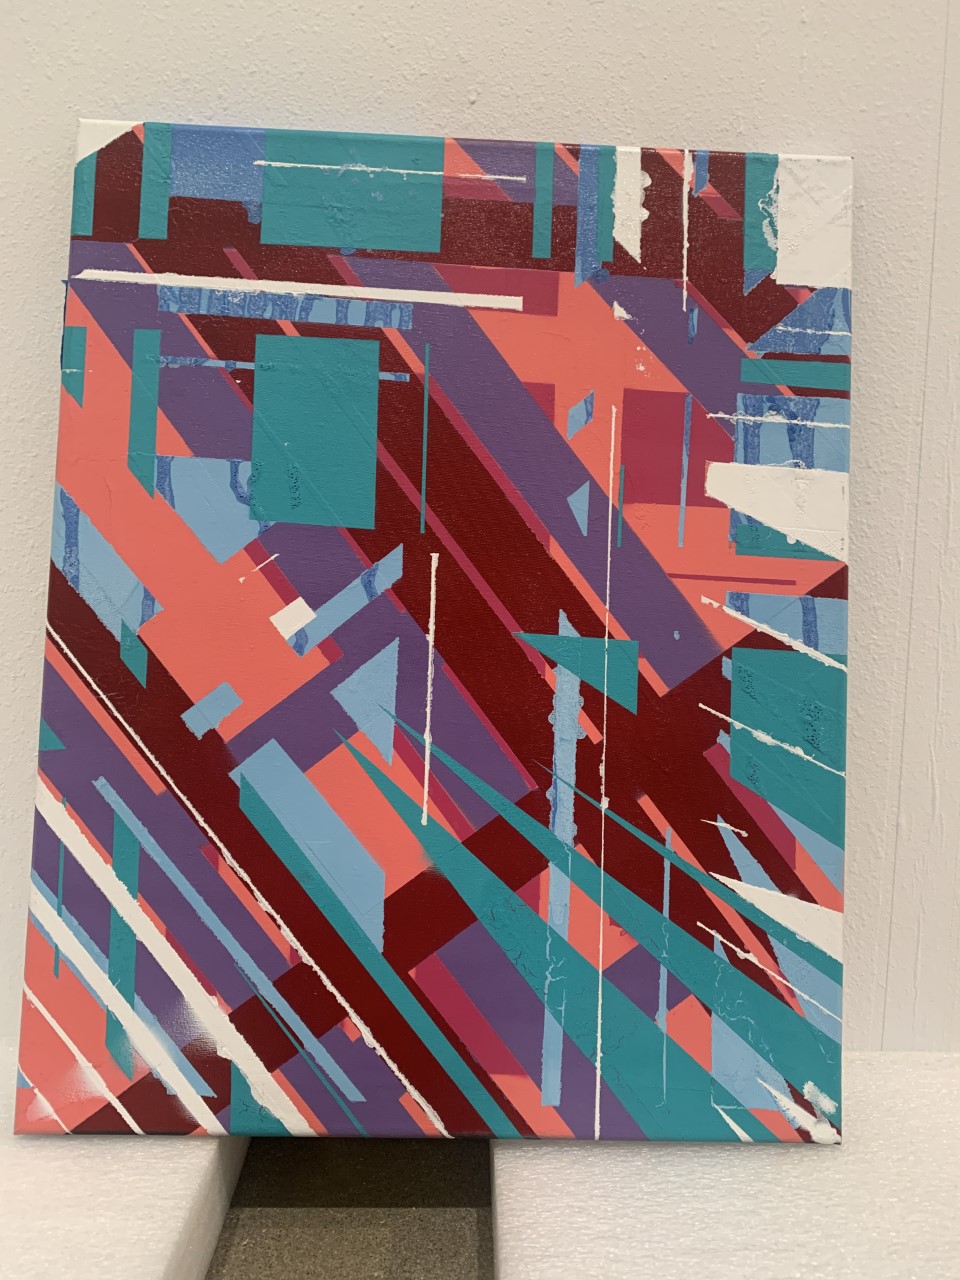 Lock Down Painting 2, image is a geometric artwork thats blue, pink, purple, and white